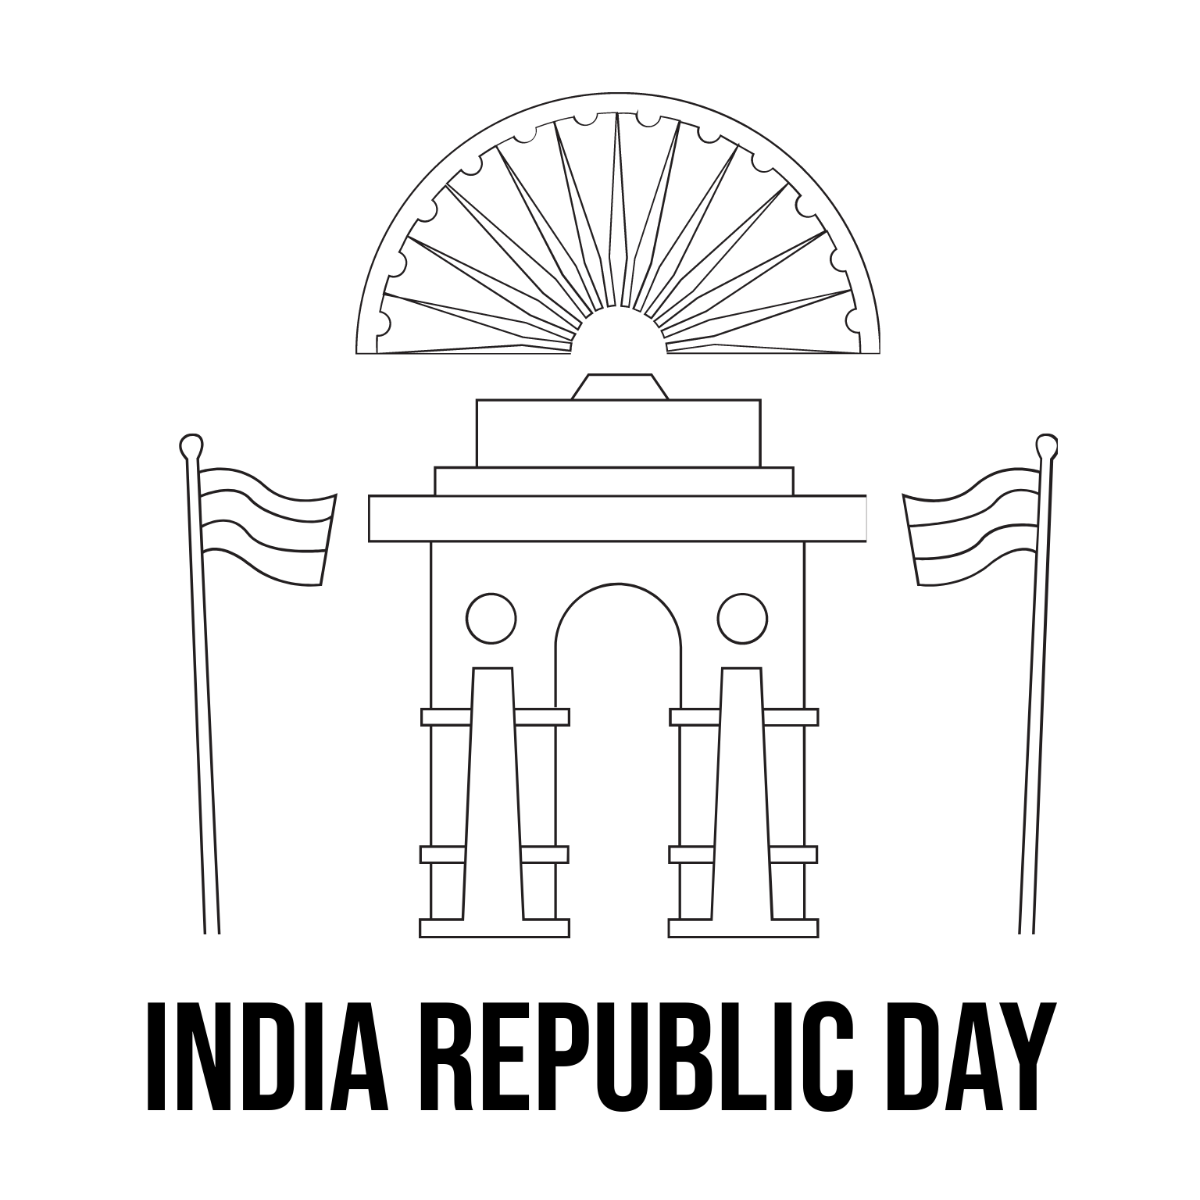 Drawing Book - Republic Day scenery easy drawing for beginners | Facebook